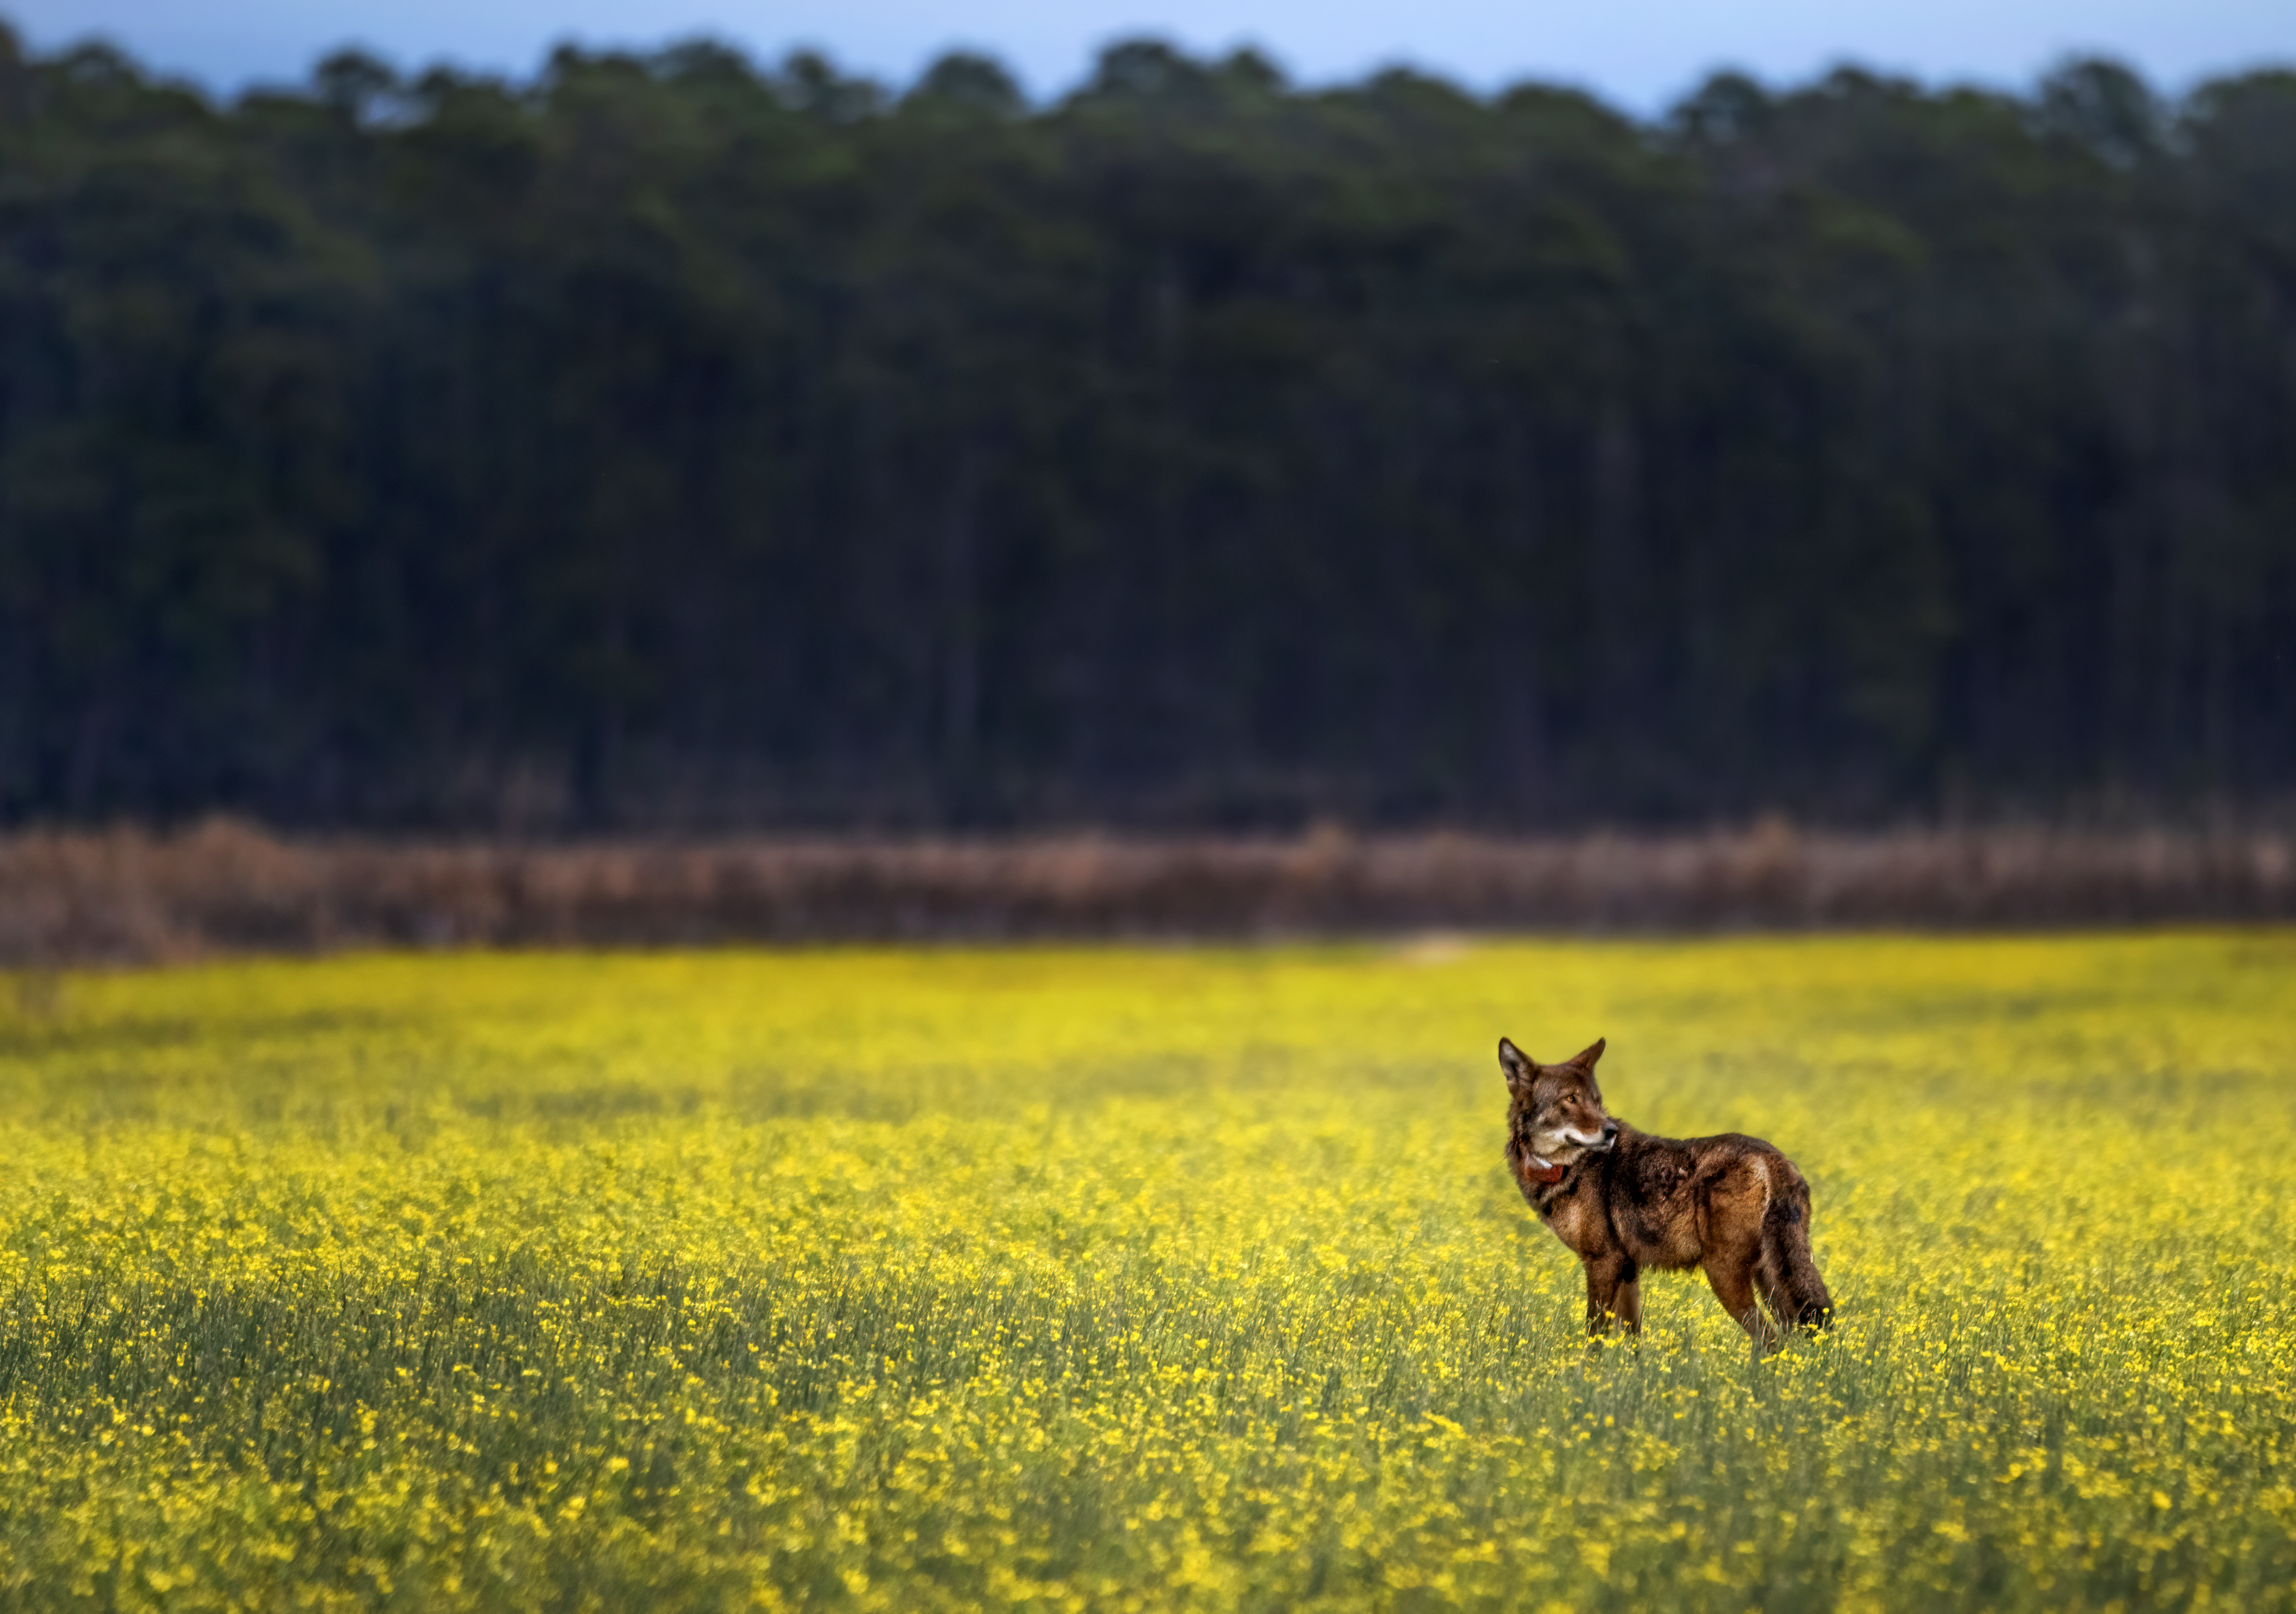 A wolf standing in a field of yellow flowers with a dark stand of trees in the background.